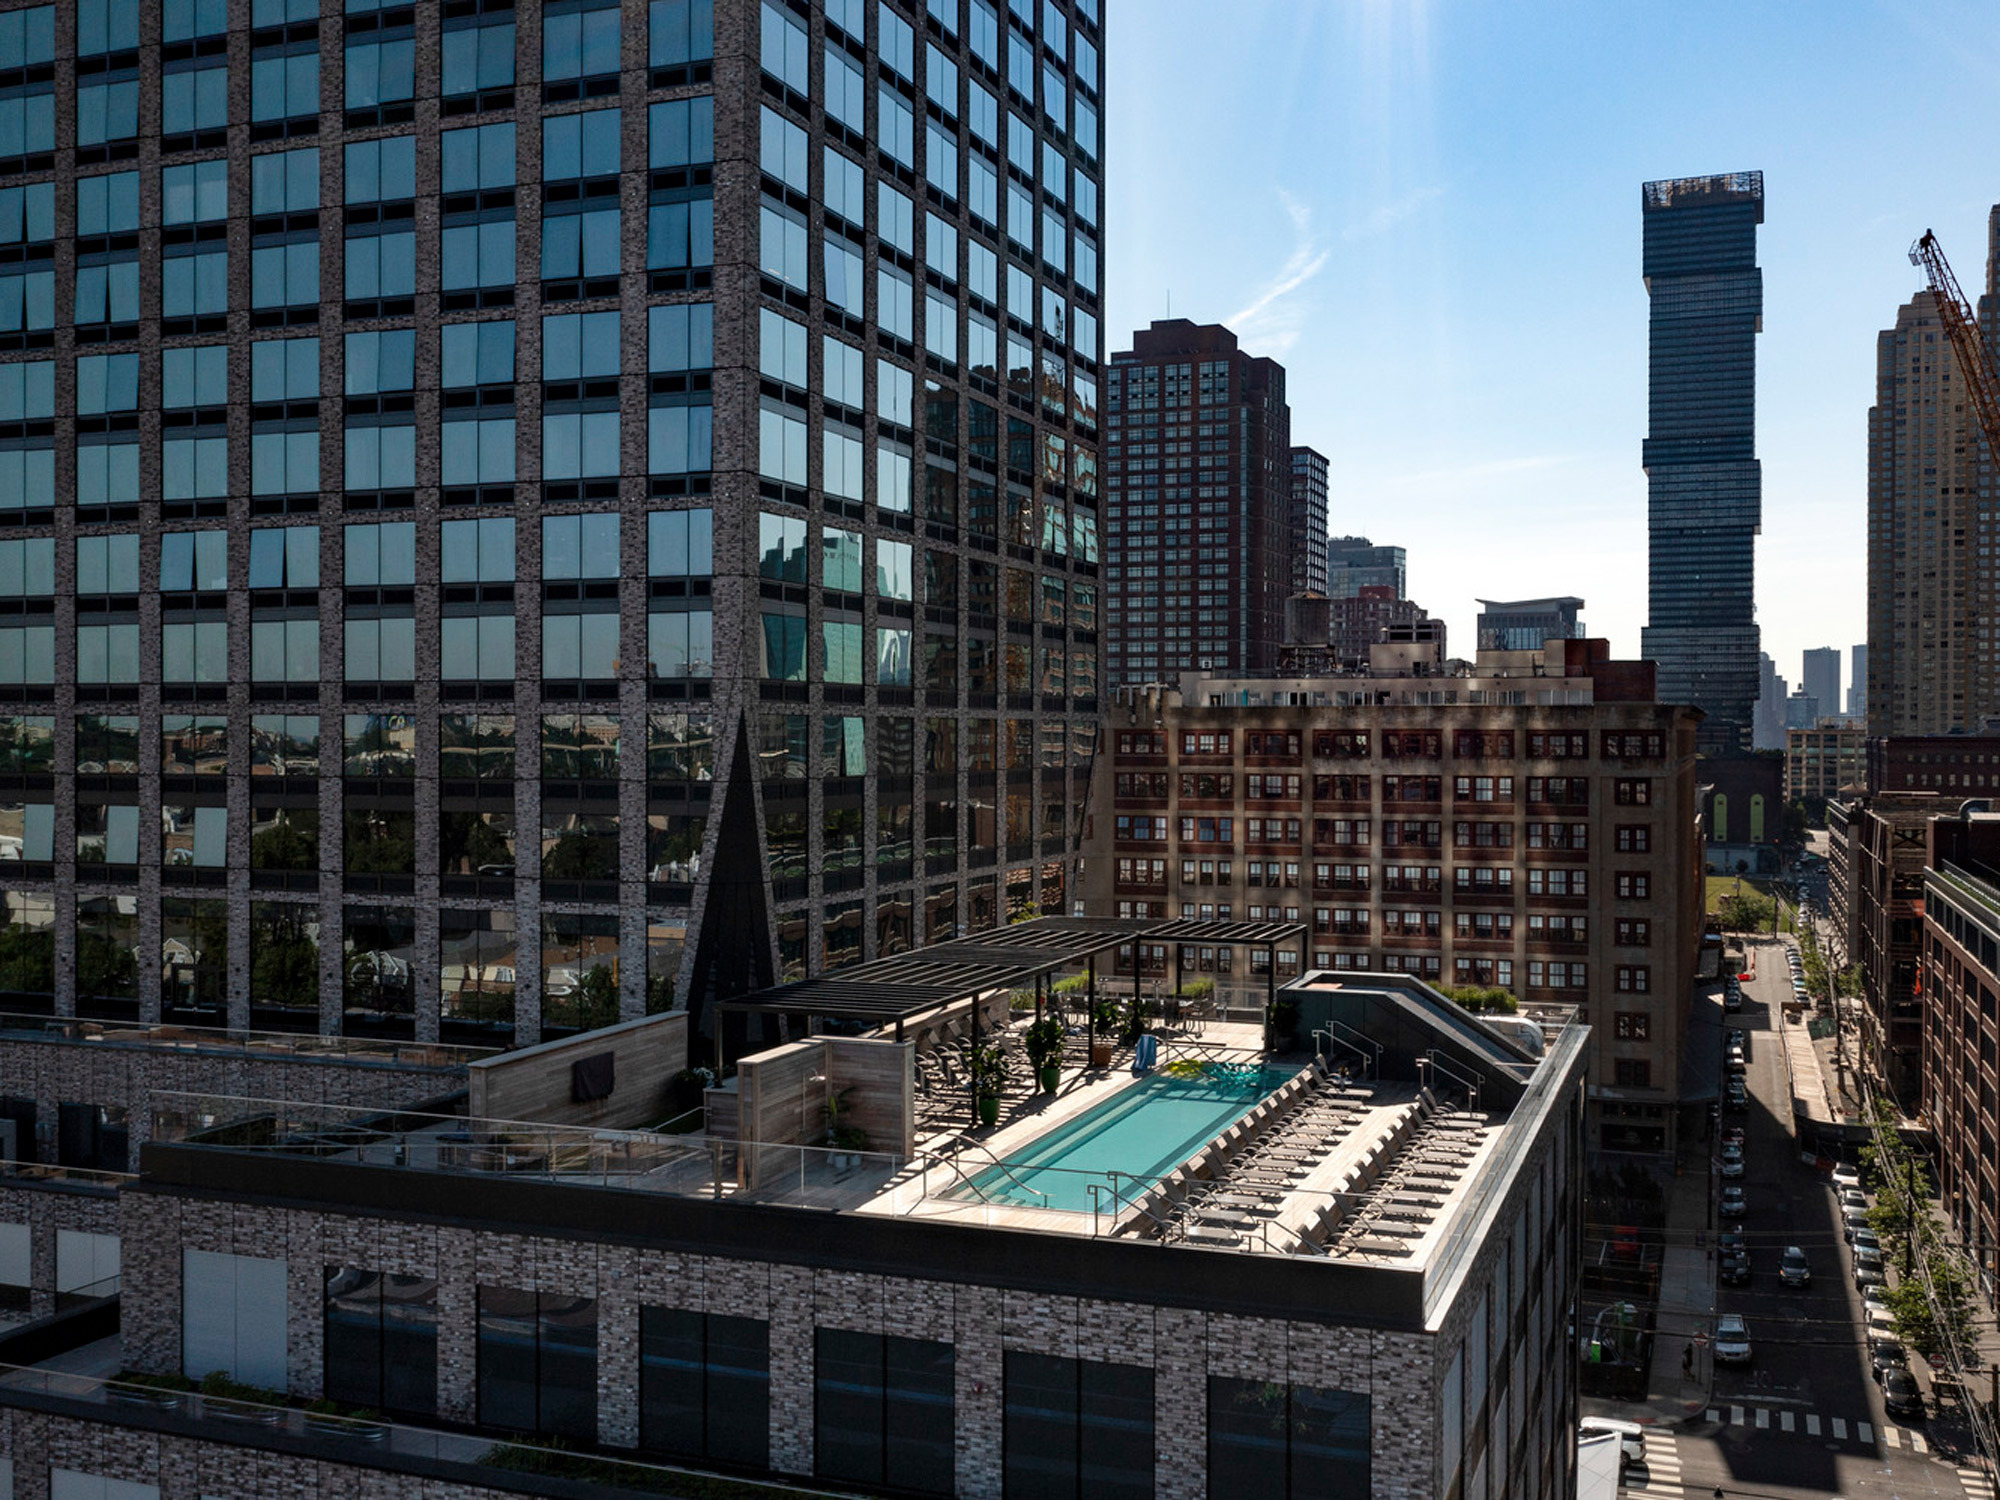 Rooftop terrace with a rectangular swimming pool reflecting the clear sky, flanked by lounge chairs, amidst a backdrop of mixed architectural styles from neighboring high-rise buildings, highlighting urban design integration.